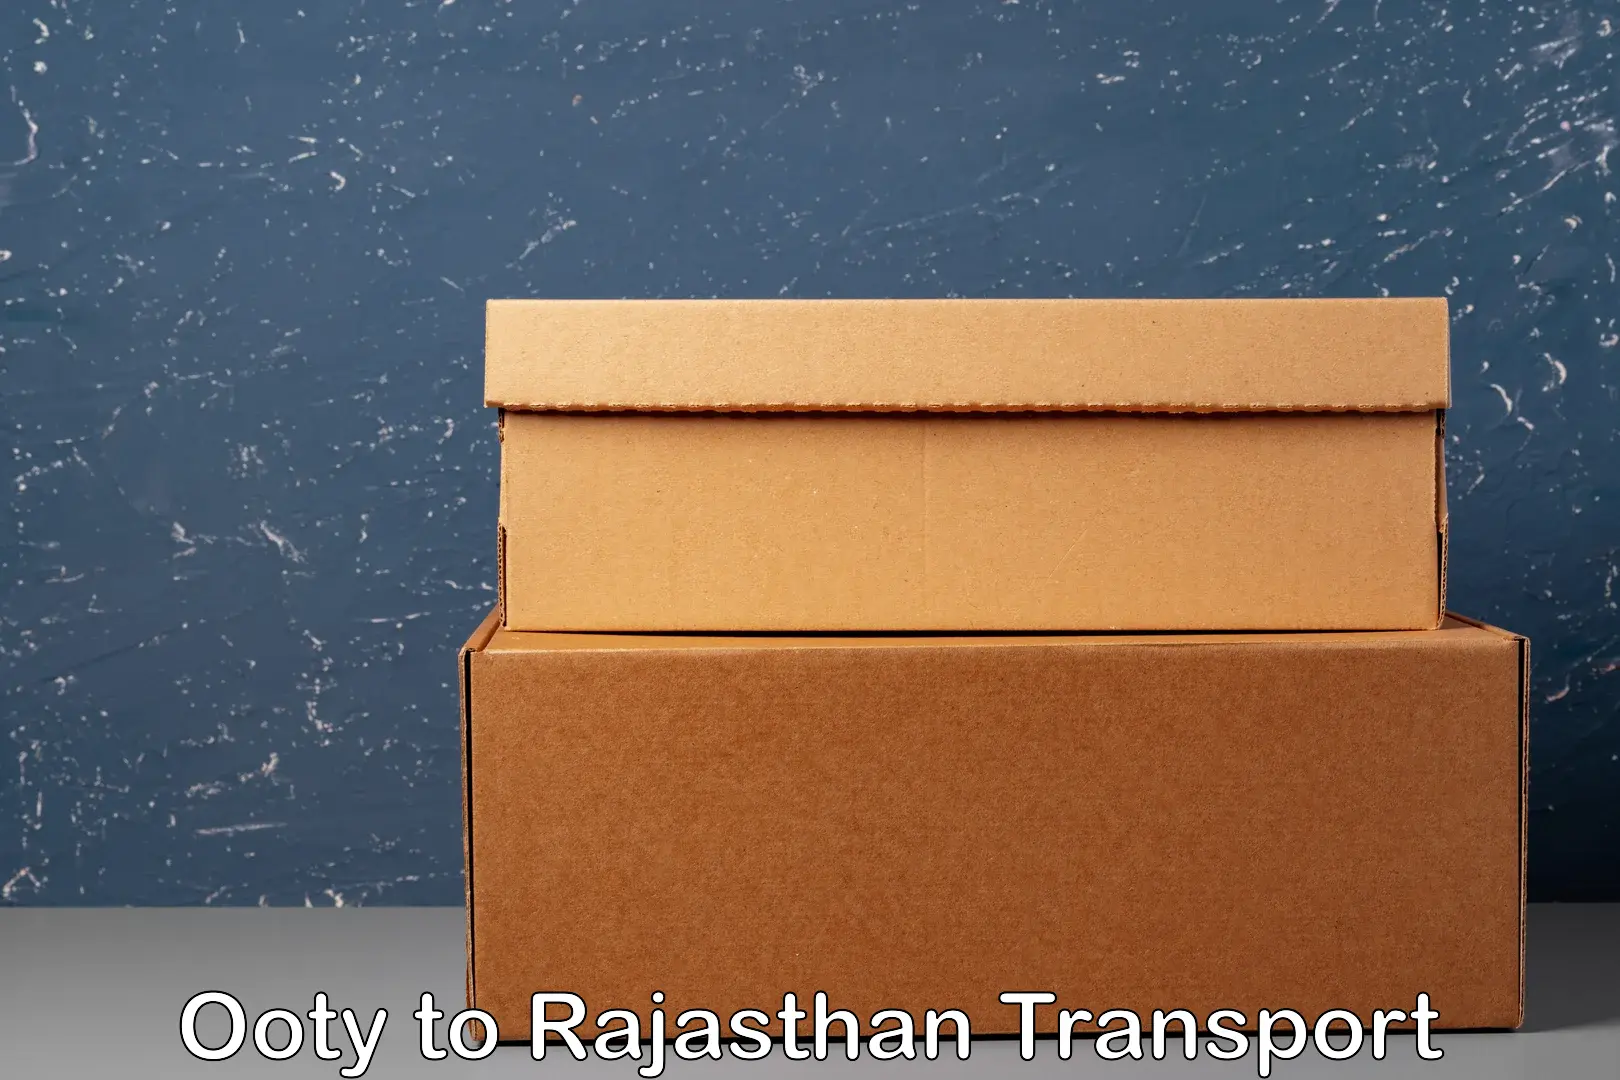 Container transport service Ooty to Neemrana